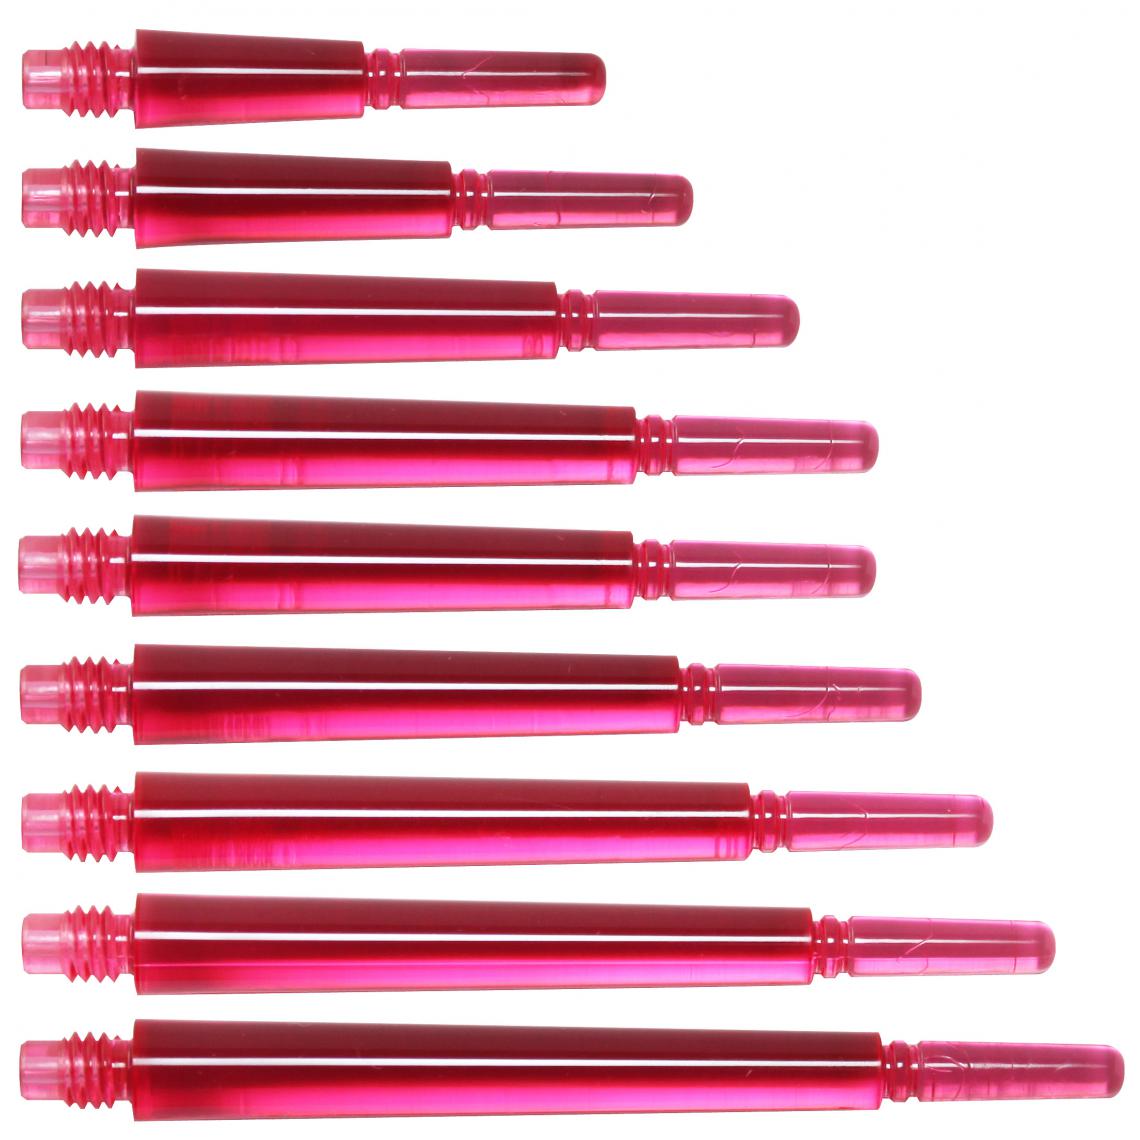 Sulion - Shaft Fit Filght GEAR NORMAL SPINNING - Clear Rose (Plusieurs tailles) N°2 - 18mm - Accessoires fléchettes